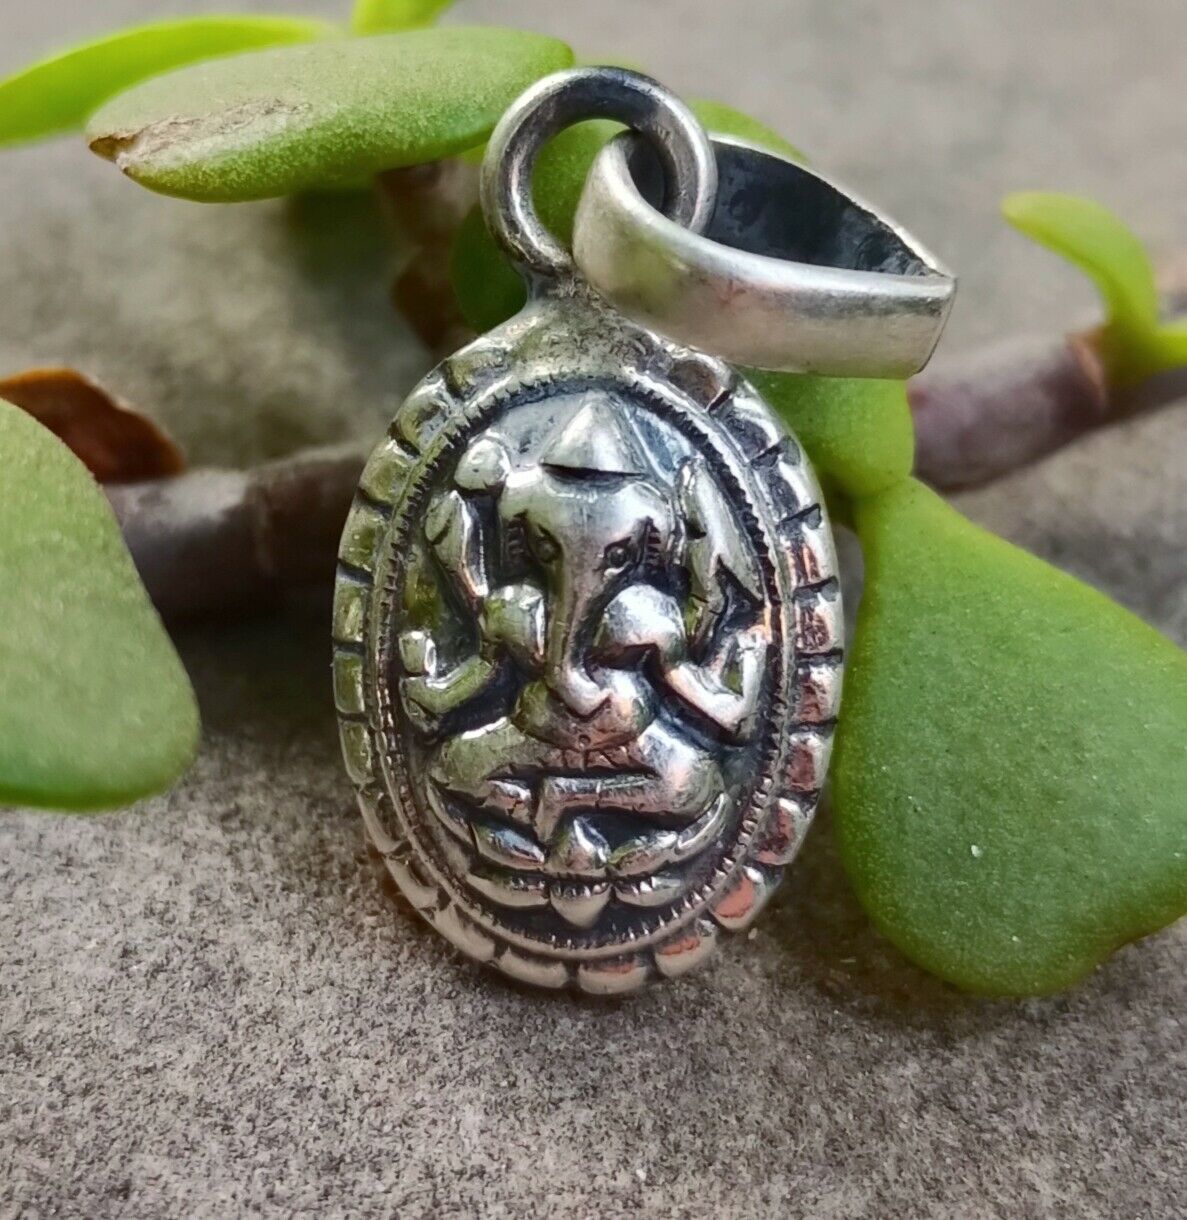 Artisan Crafted 925 Sterling Silver Ganesha Antique Pendant Oxidized Free Ship 2 - $25.27